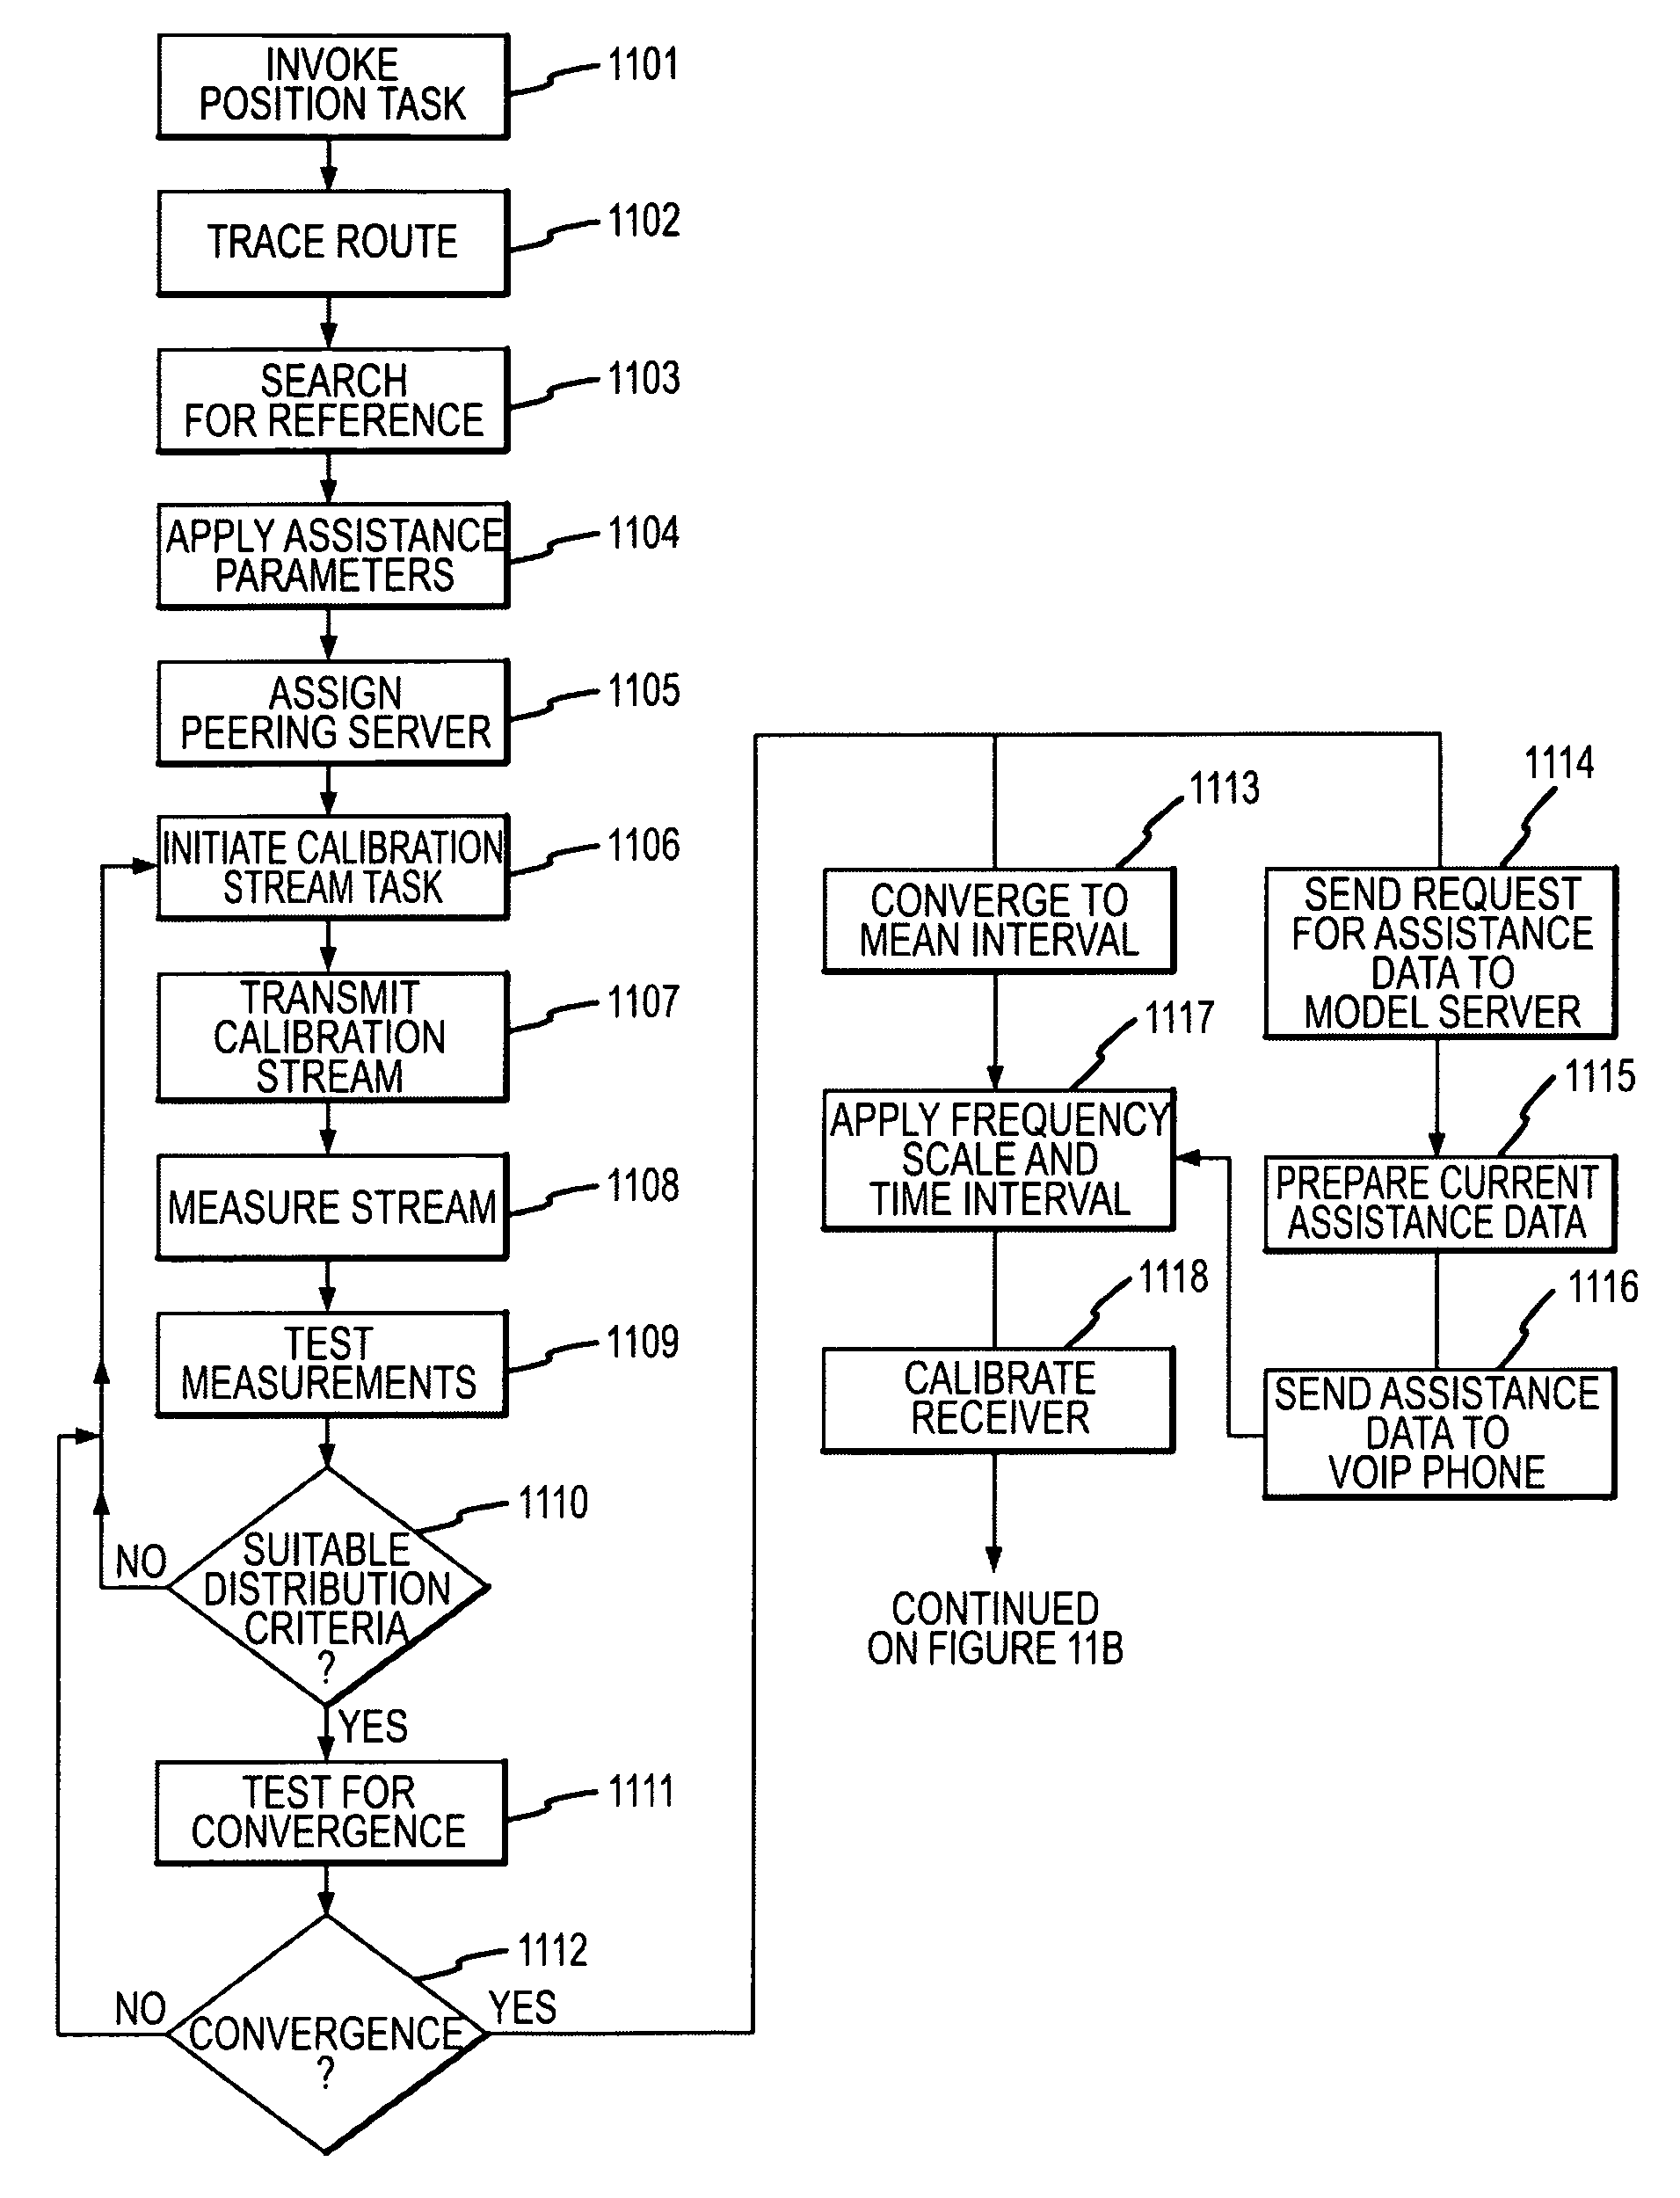 System and methods for IP and VoIP device location determination